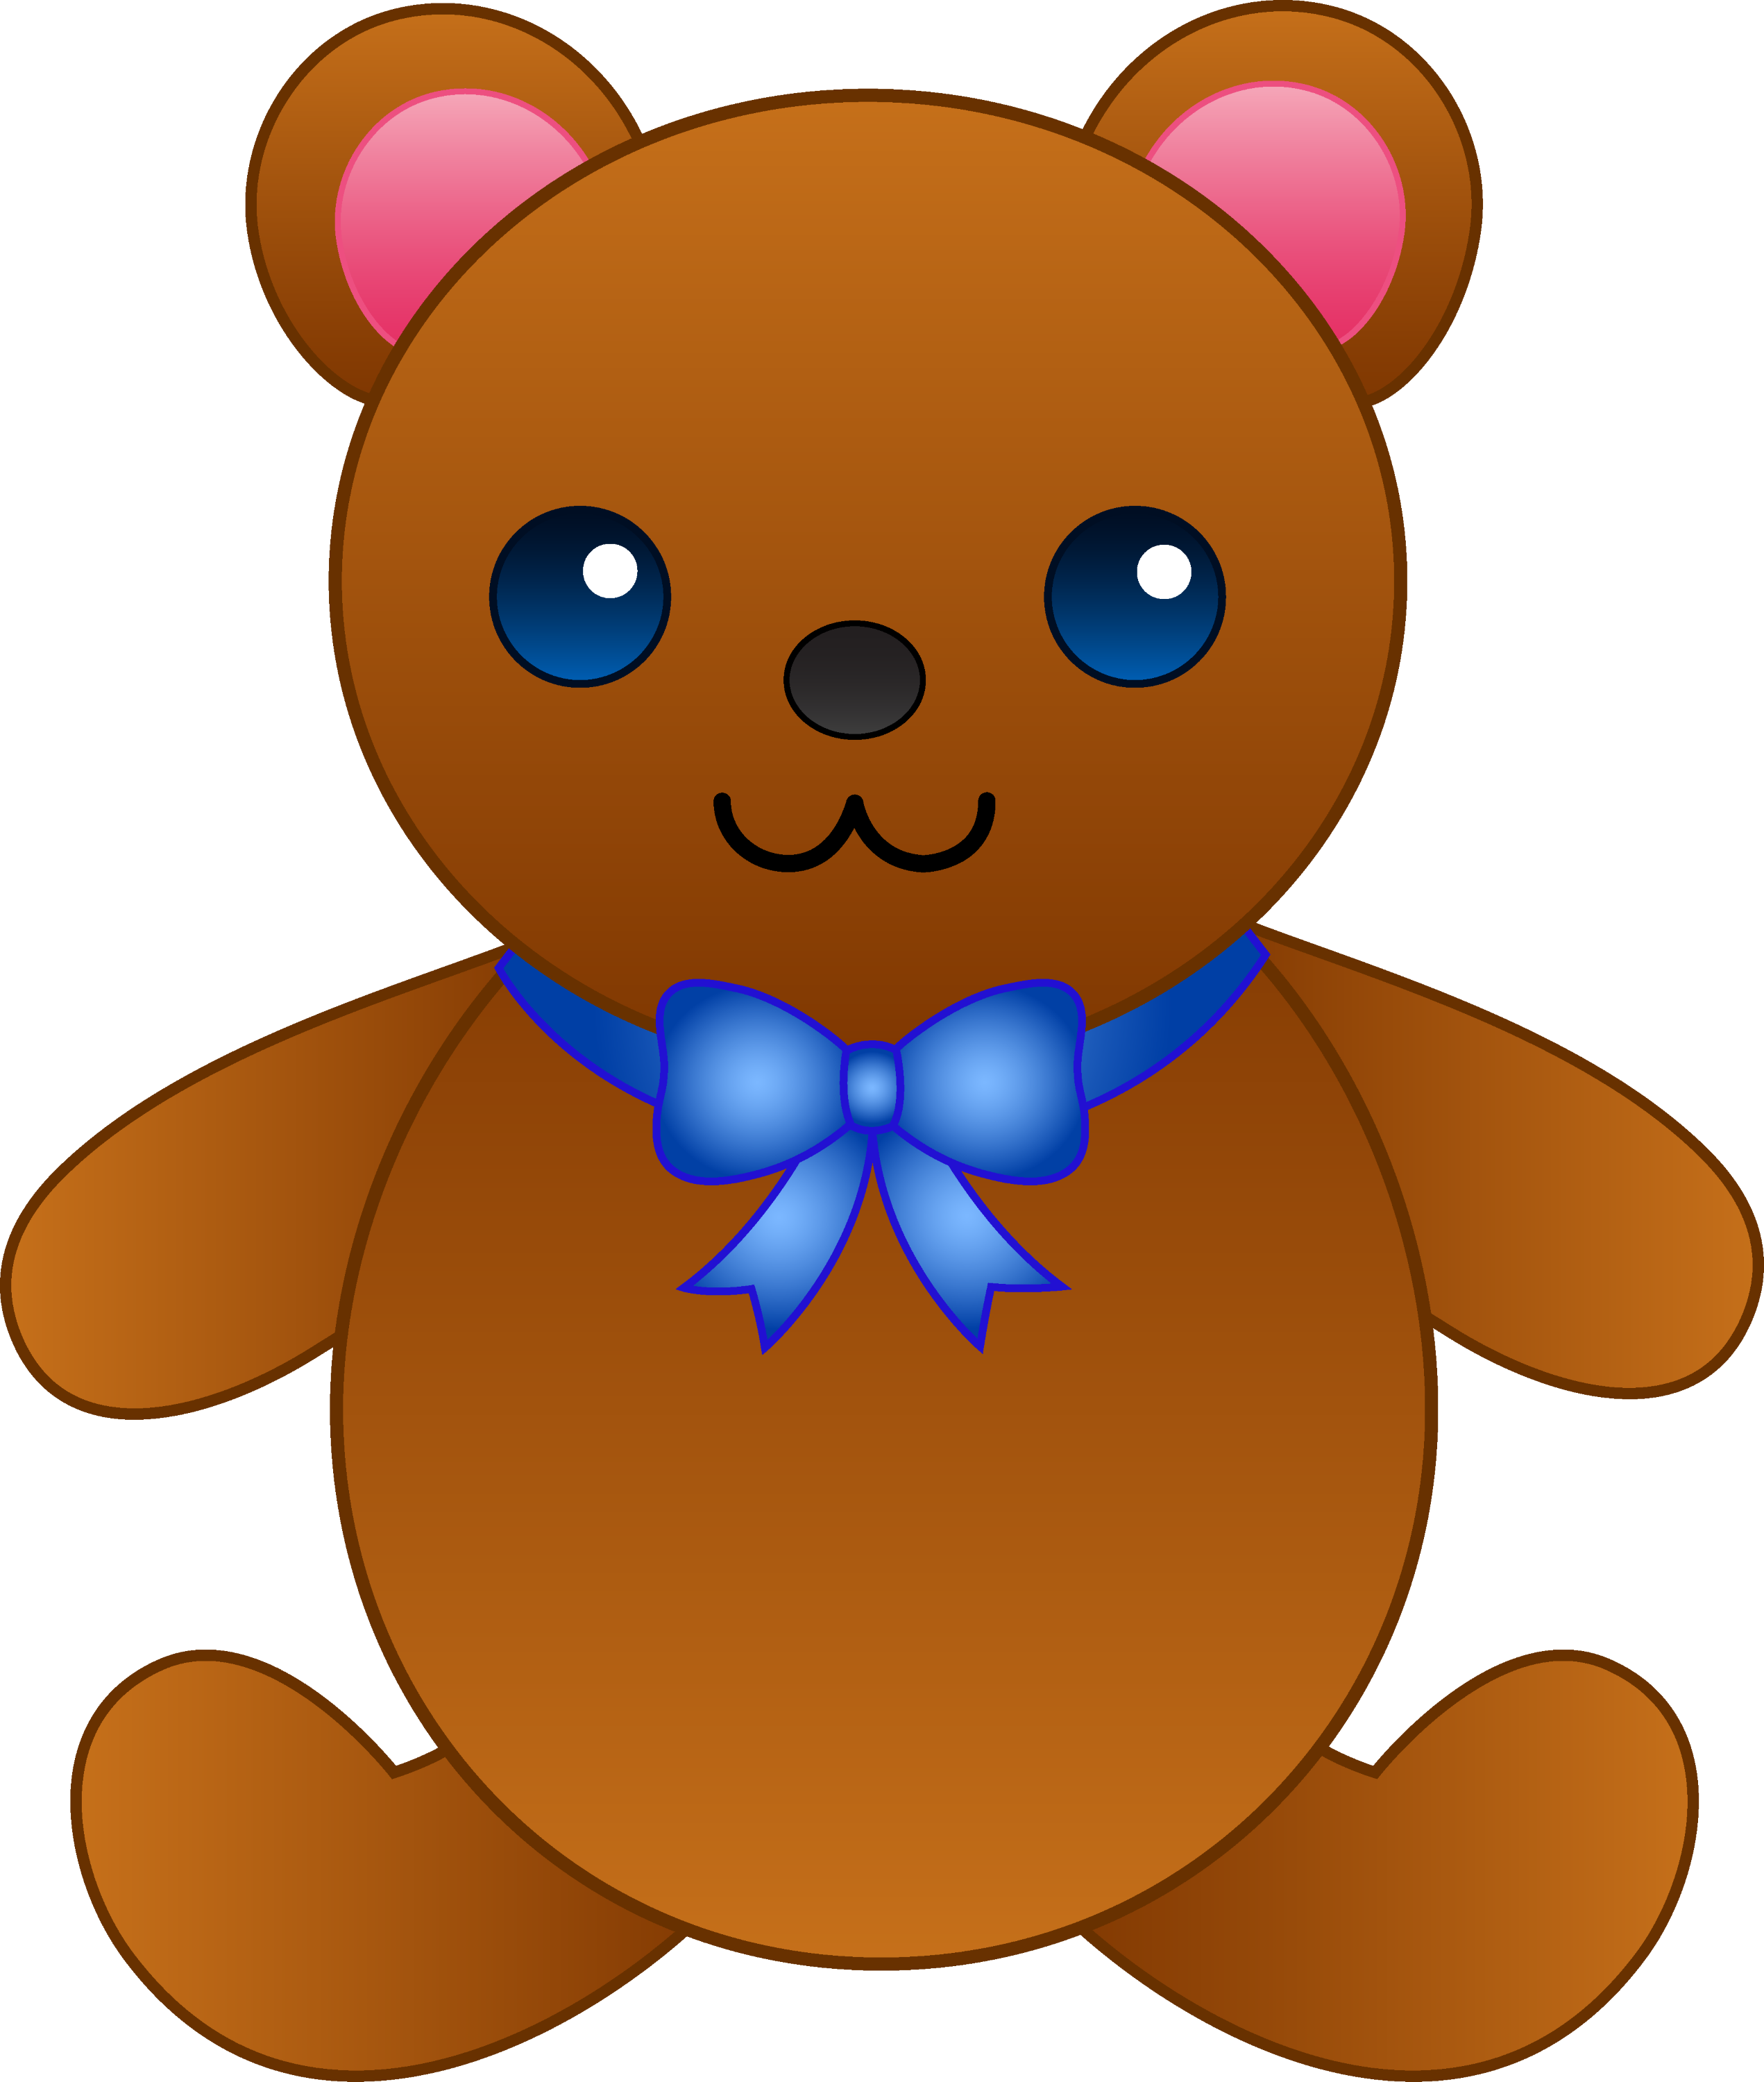 Cute Teddy Bear Background PNG Image